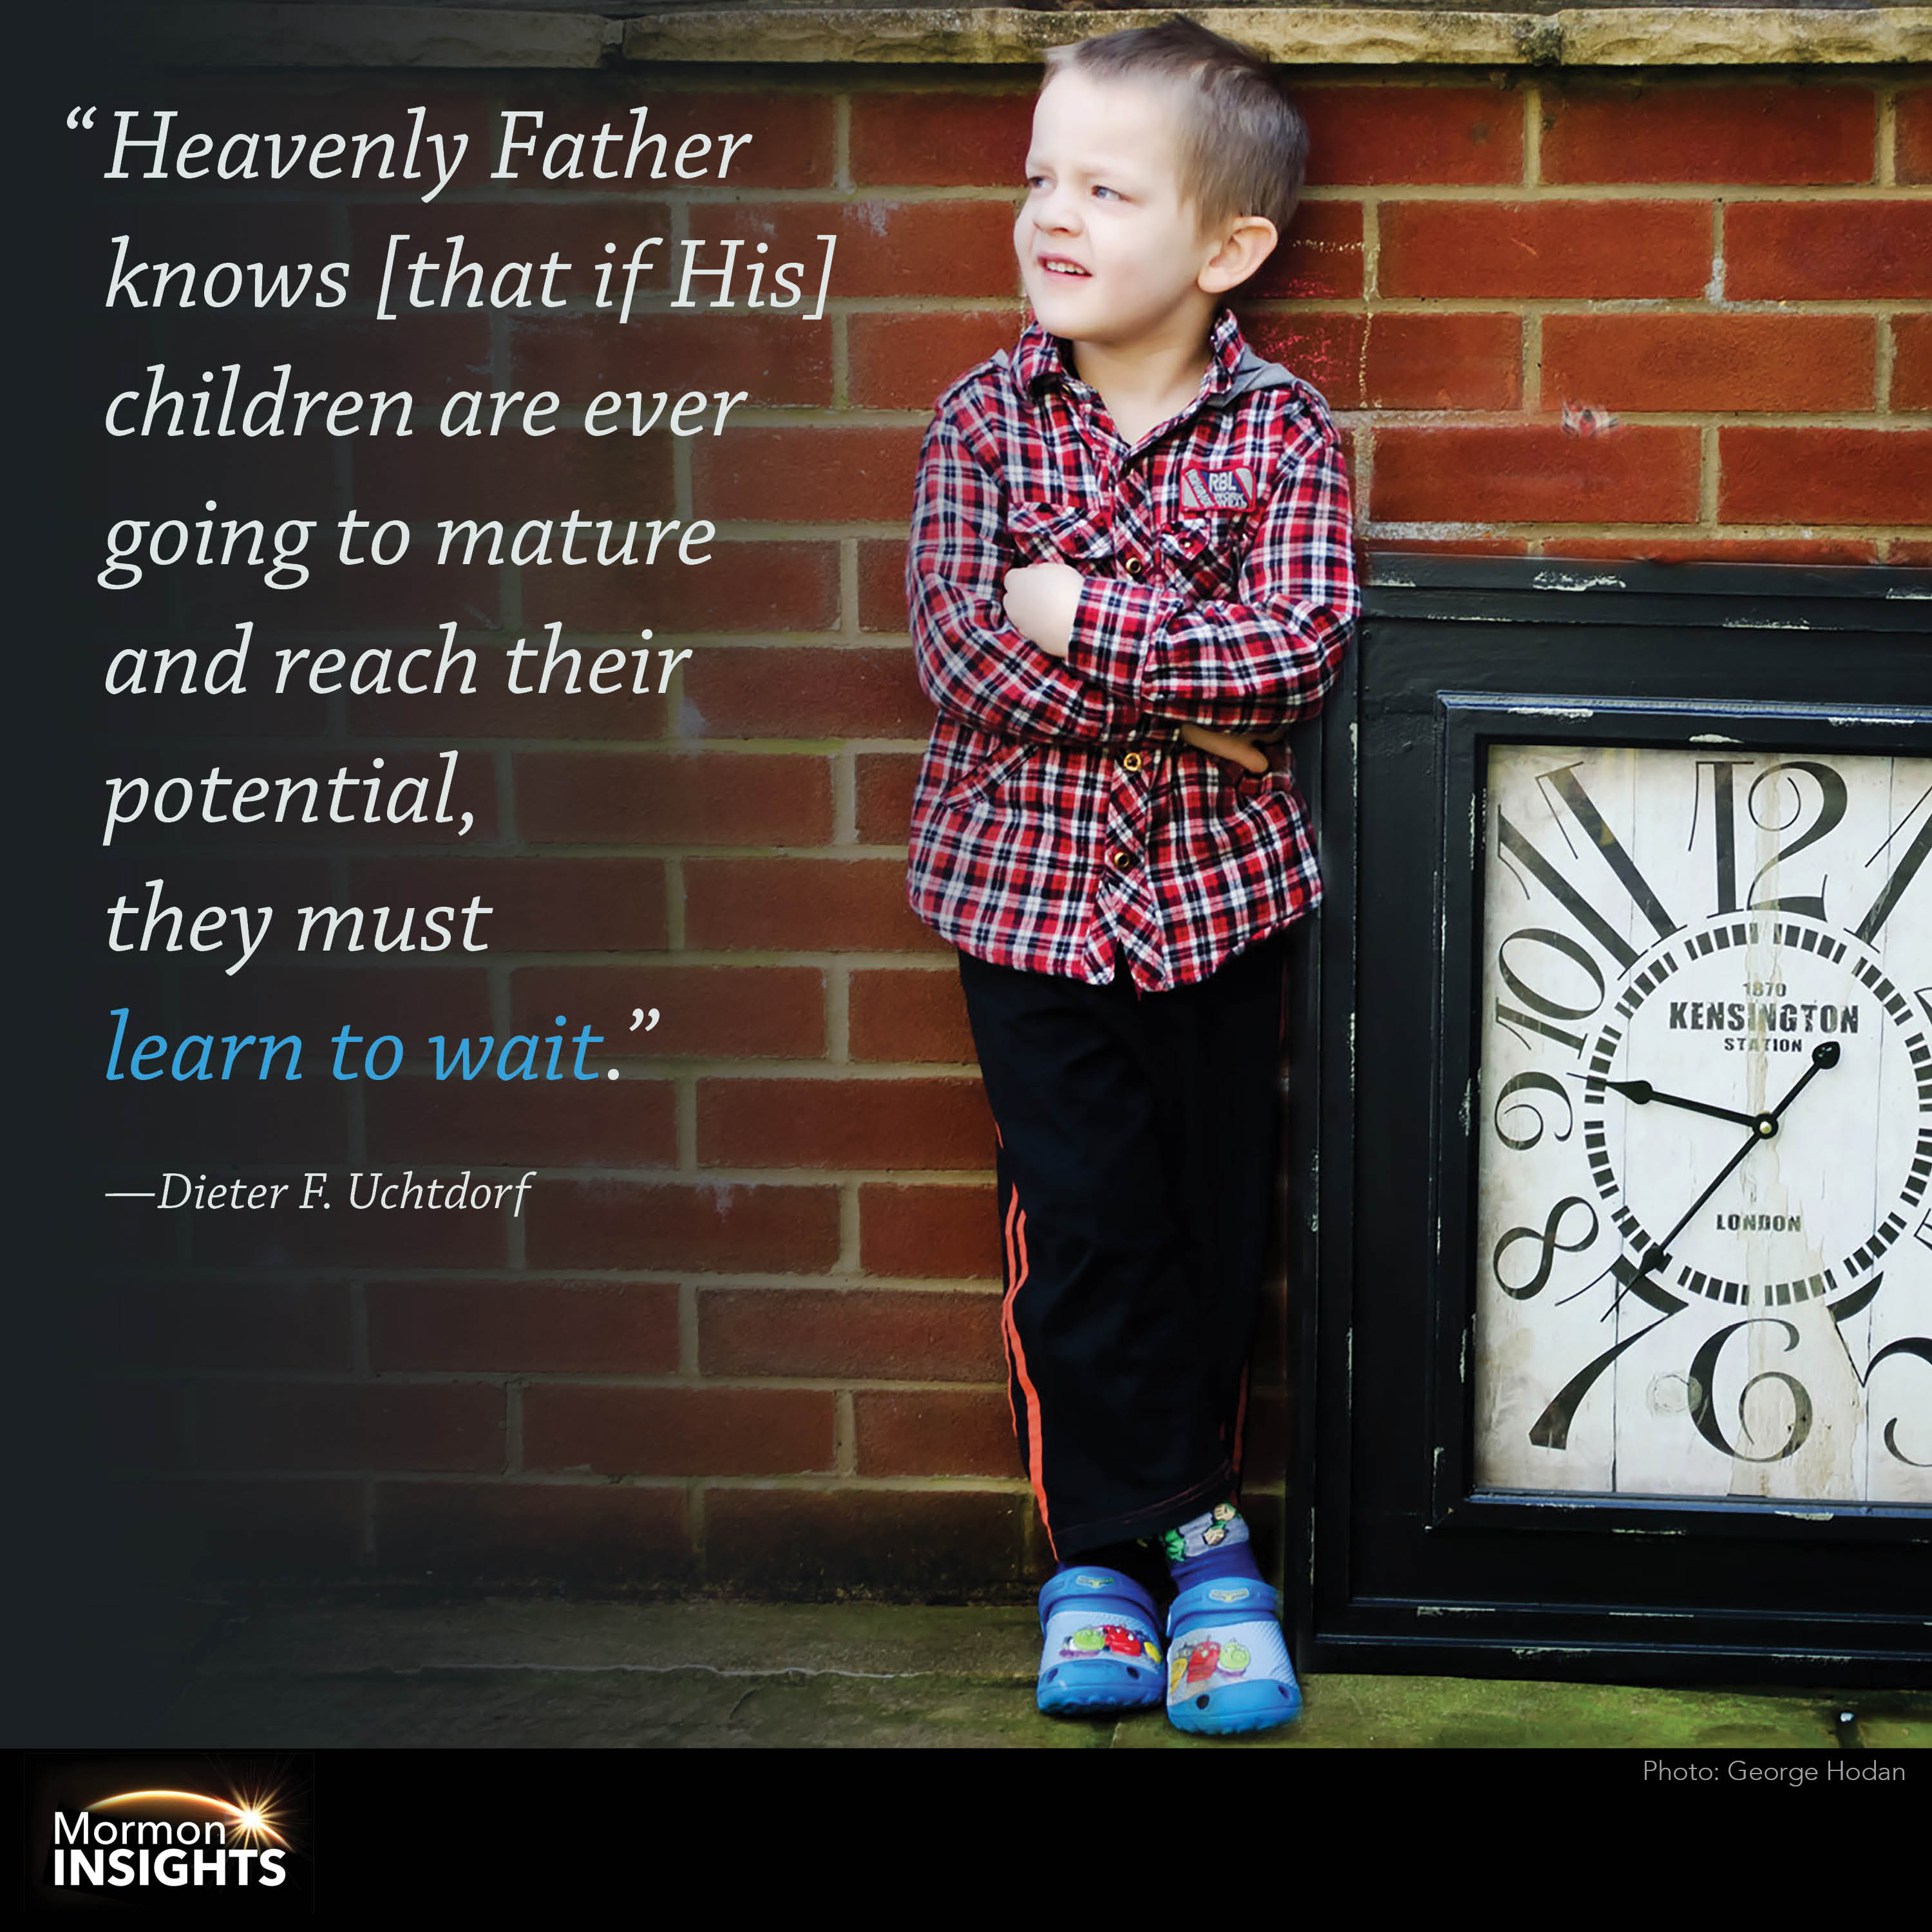 "Heavenly Father knows [that if His] children are ever going to mature and reach their potential, they must learn to wait." - Dieter F. Uchtdorf